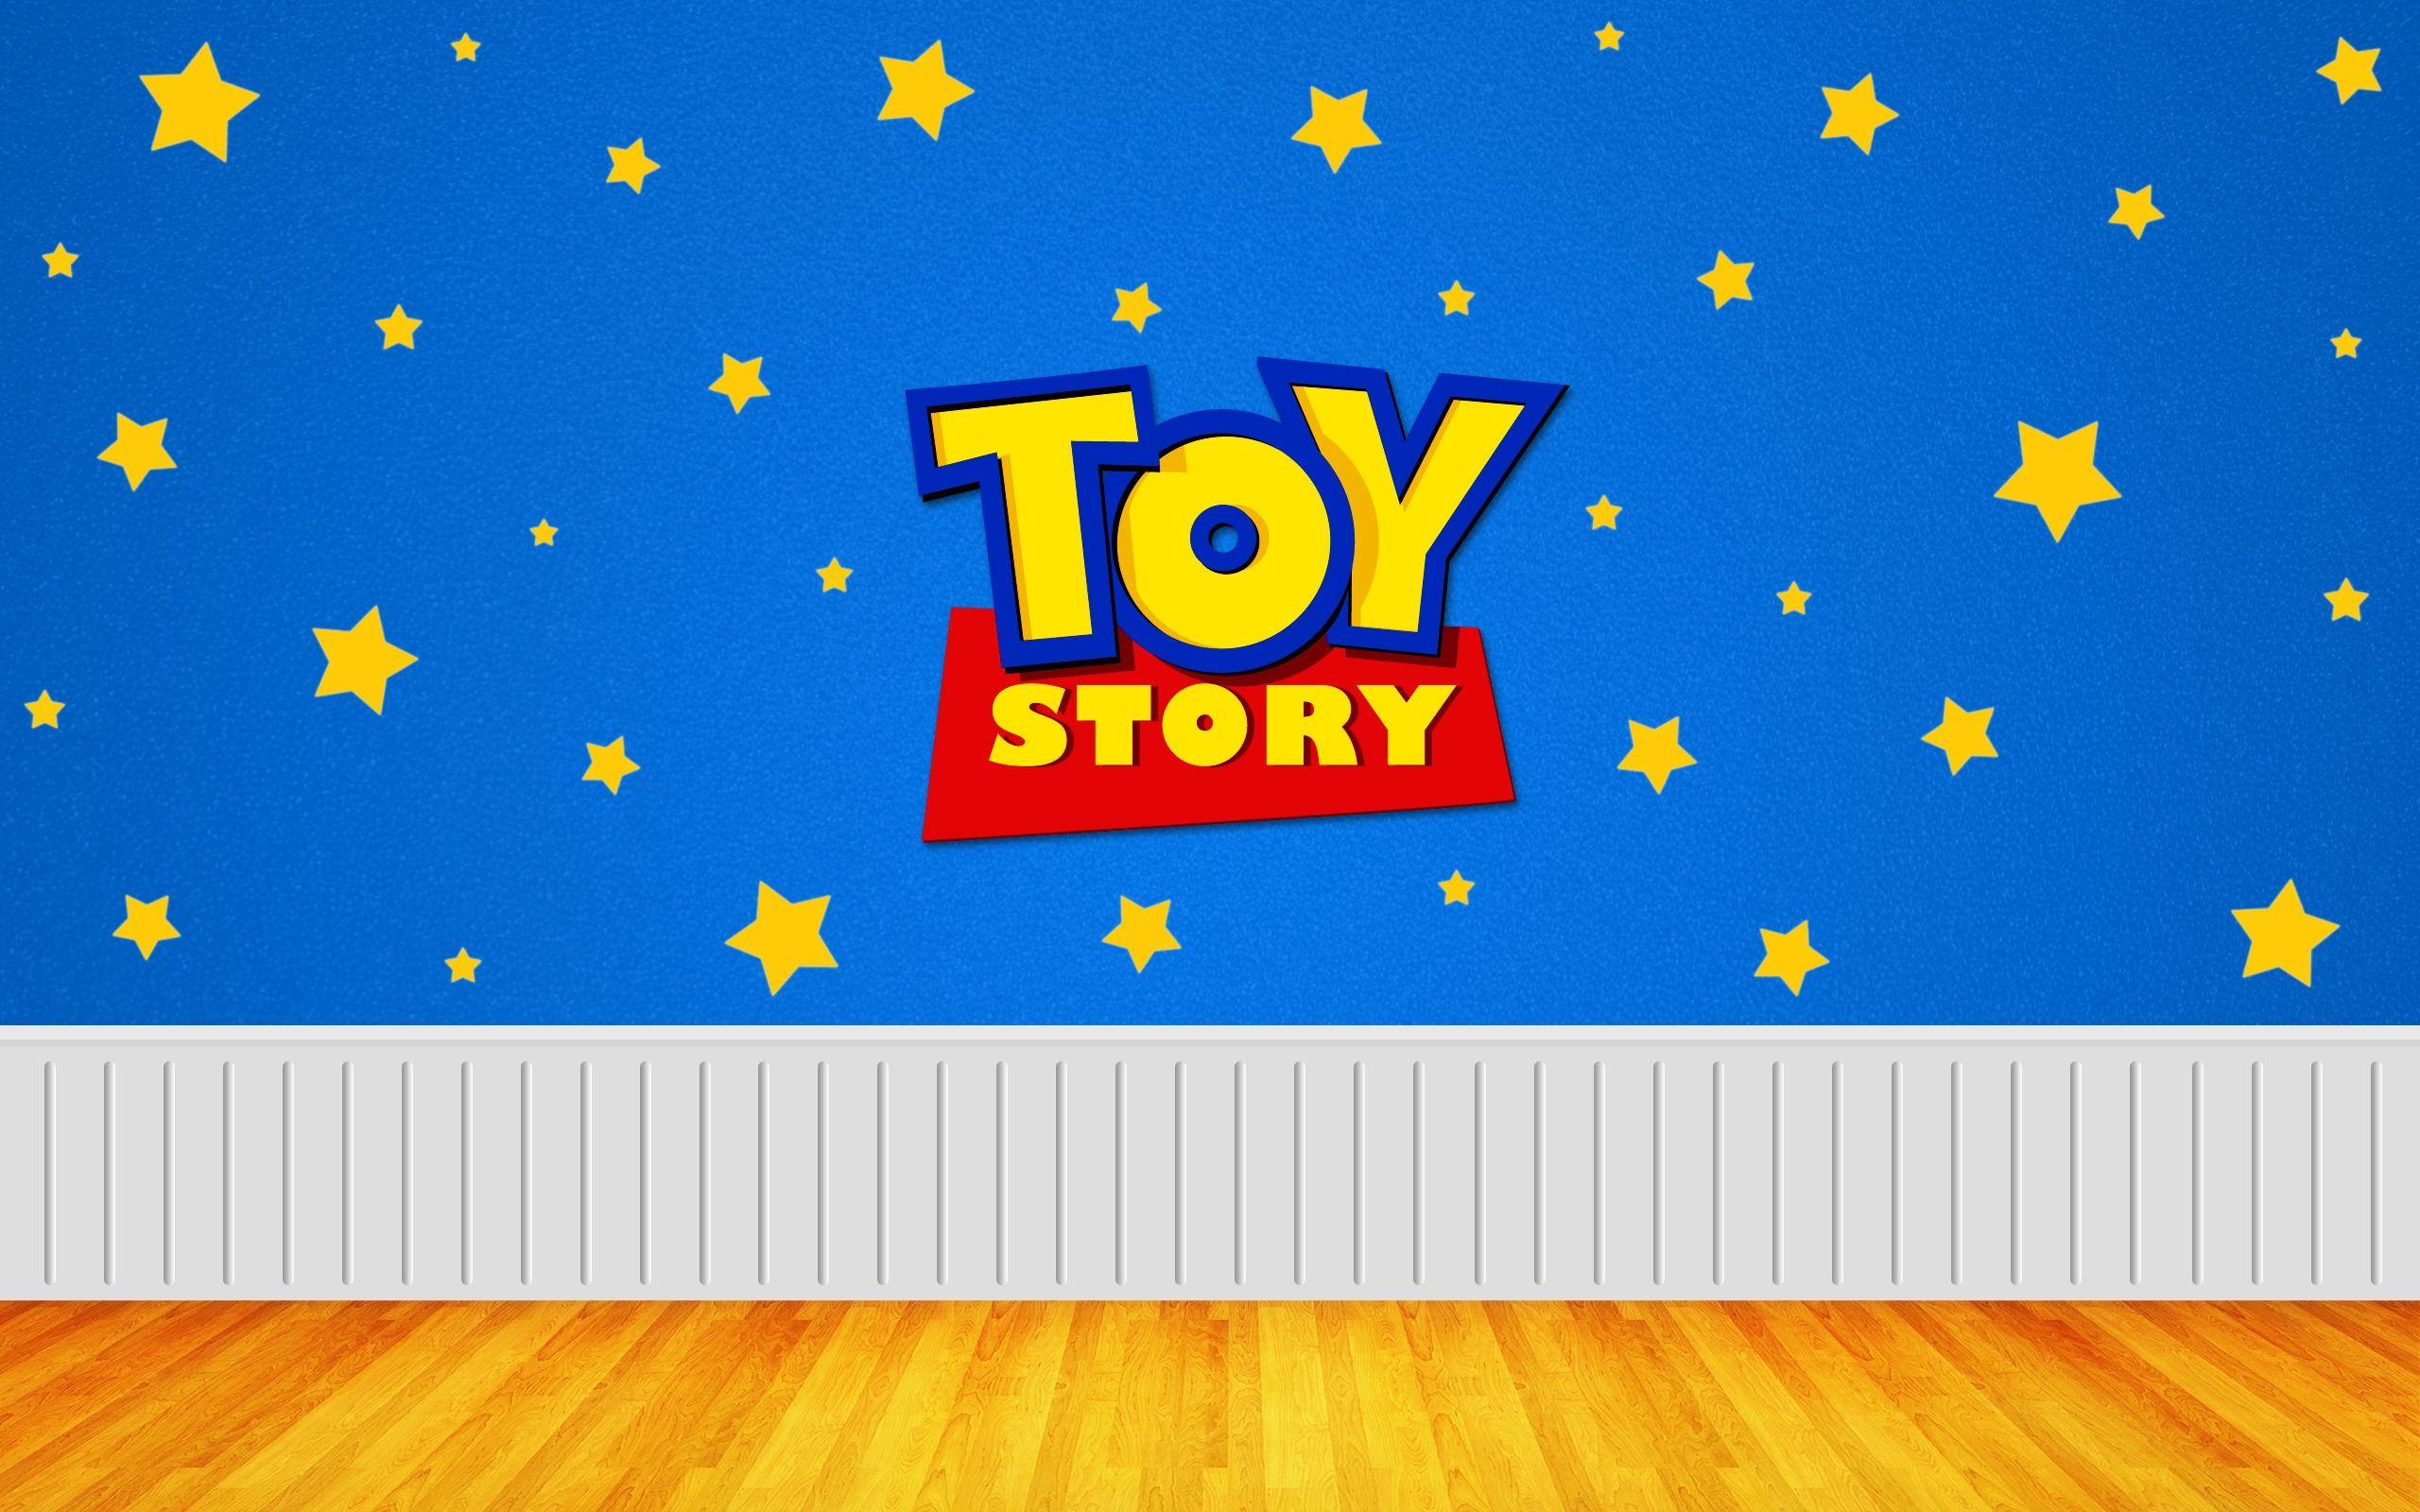 Toy Story Wallpaper 13287 2560x1600px